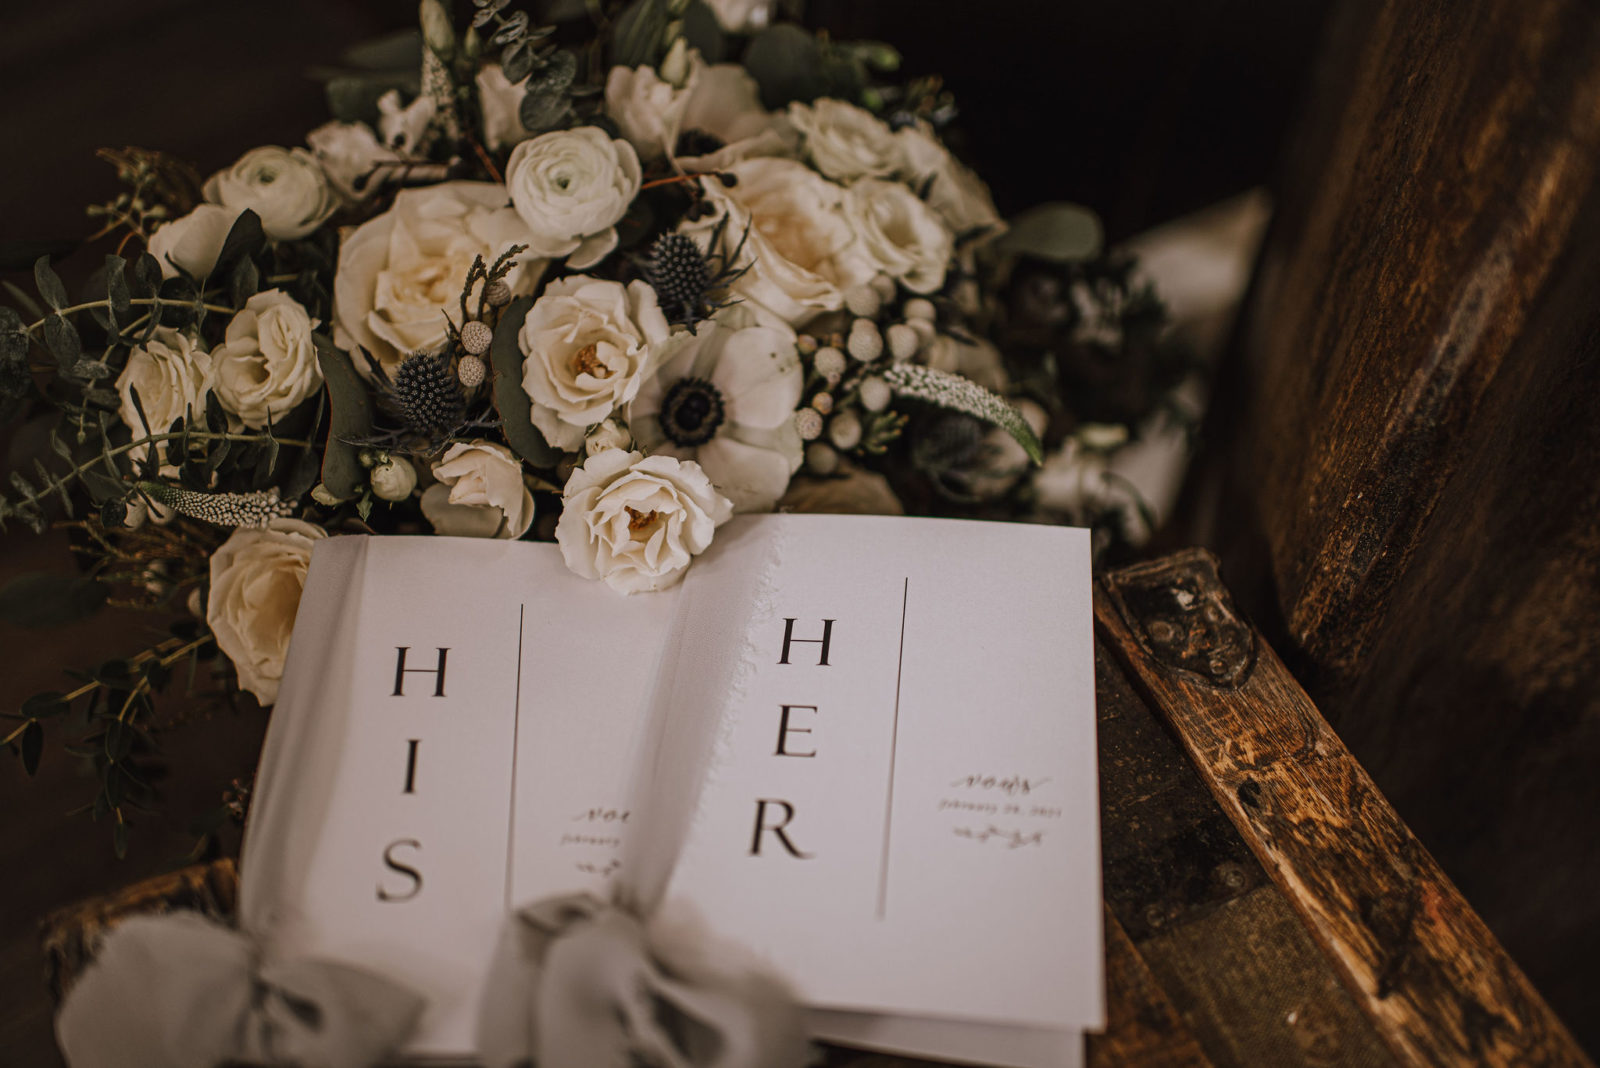 His and her vow booklets with a monochromatic bouquet